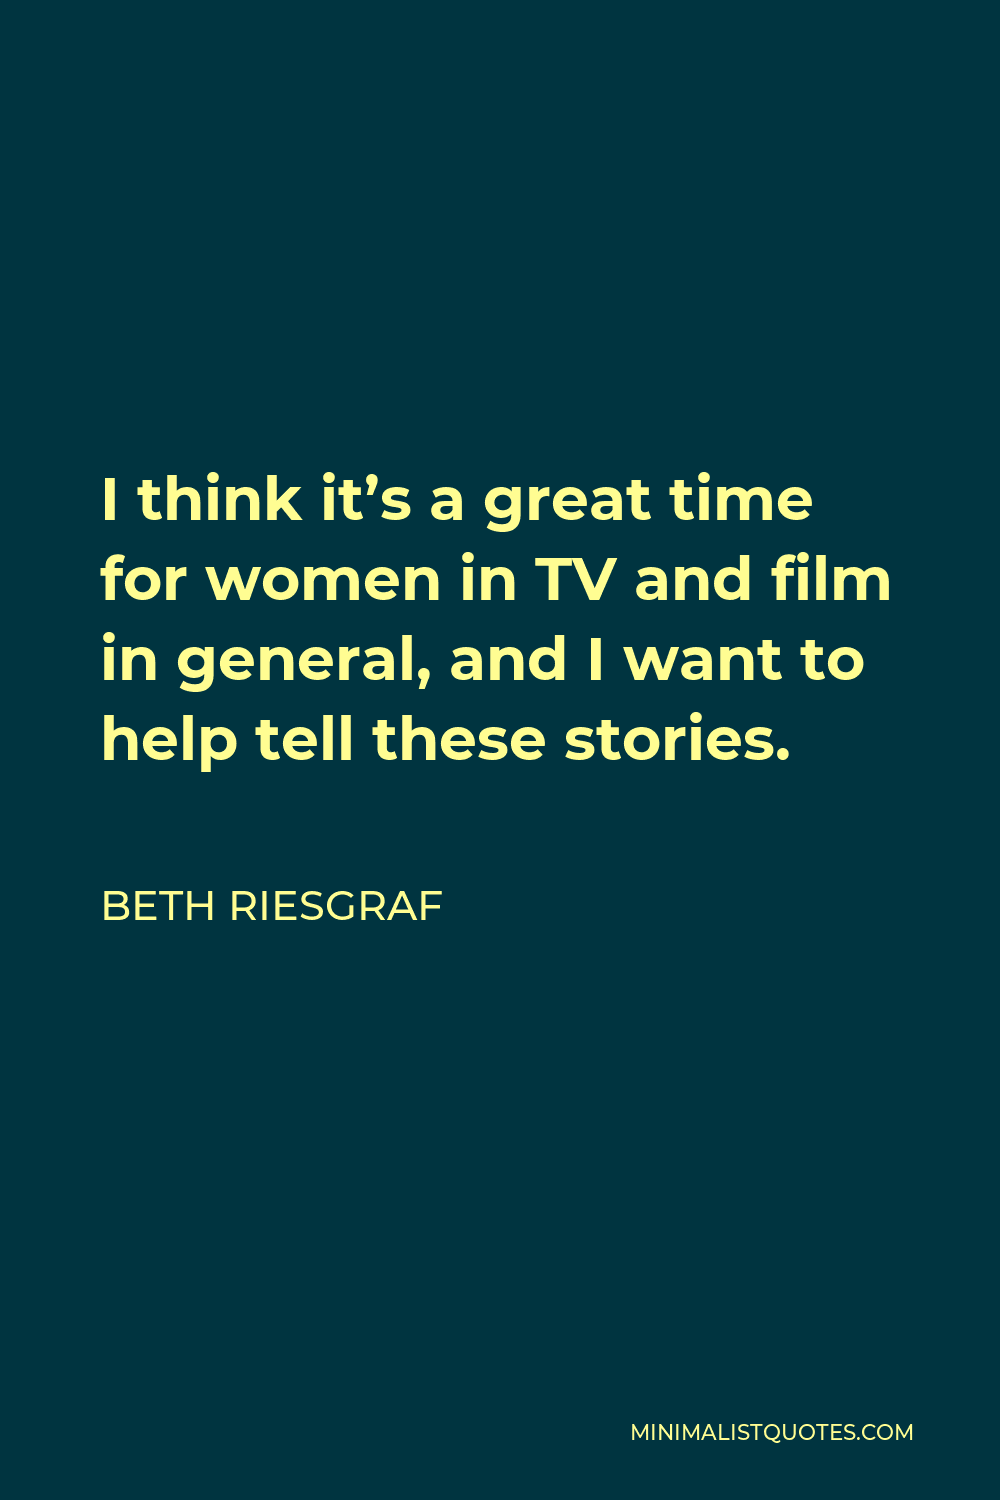 Beth Riesgraf Quote - I think it’s a great time for women in TV and film in general, and I want to help tell these stories.